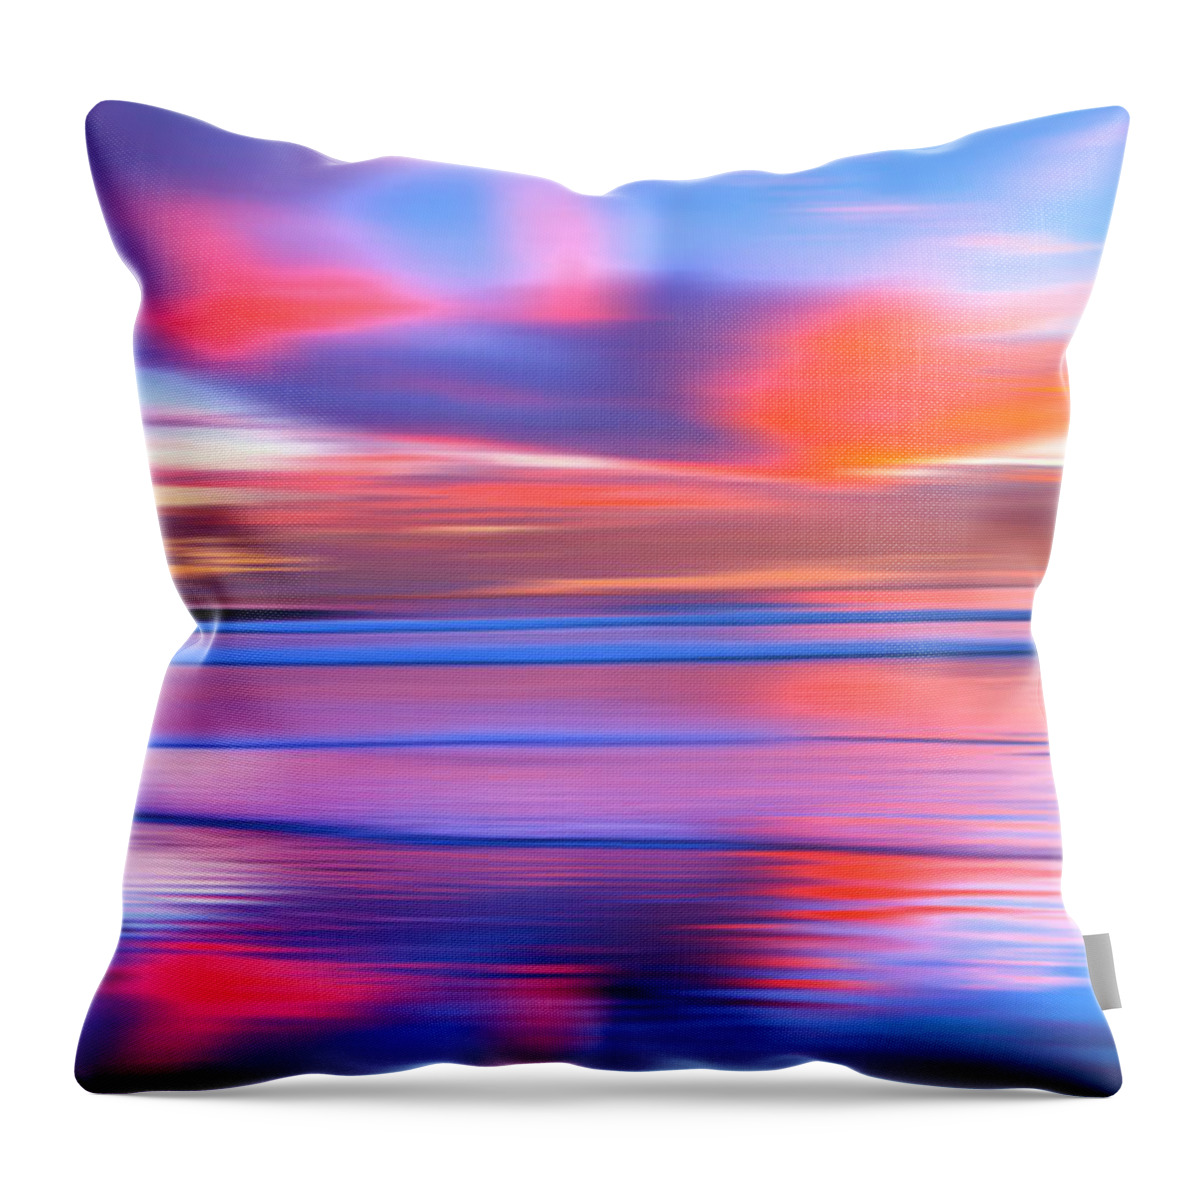 Colorful Throw Pillow featuring the photograph Huntington Pastels by Sean Davey